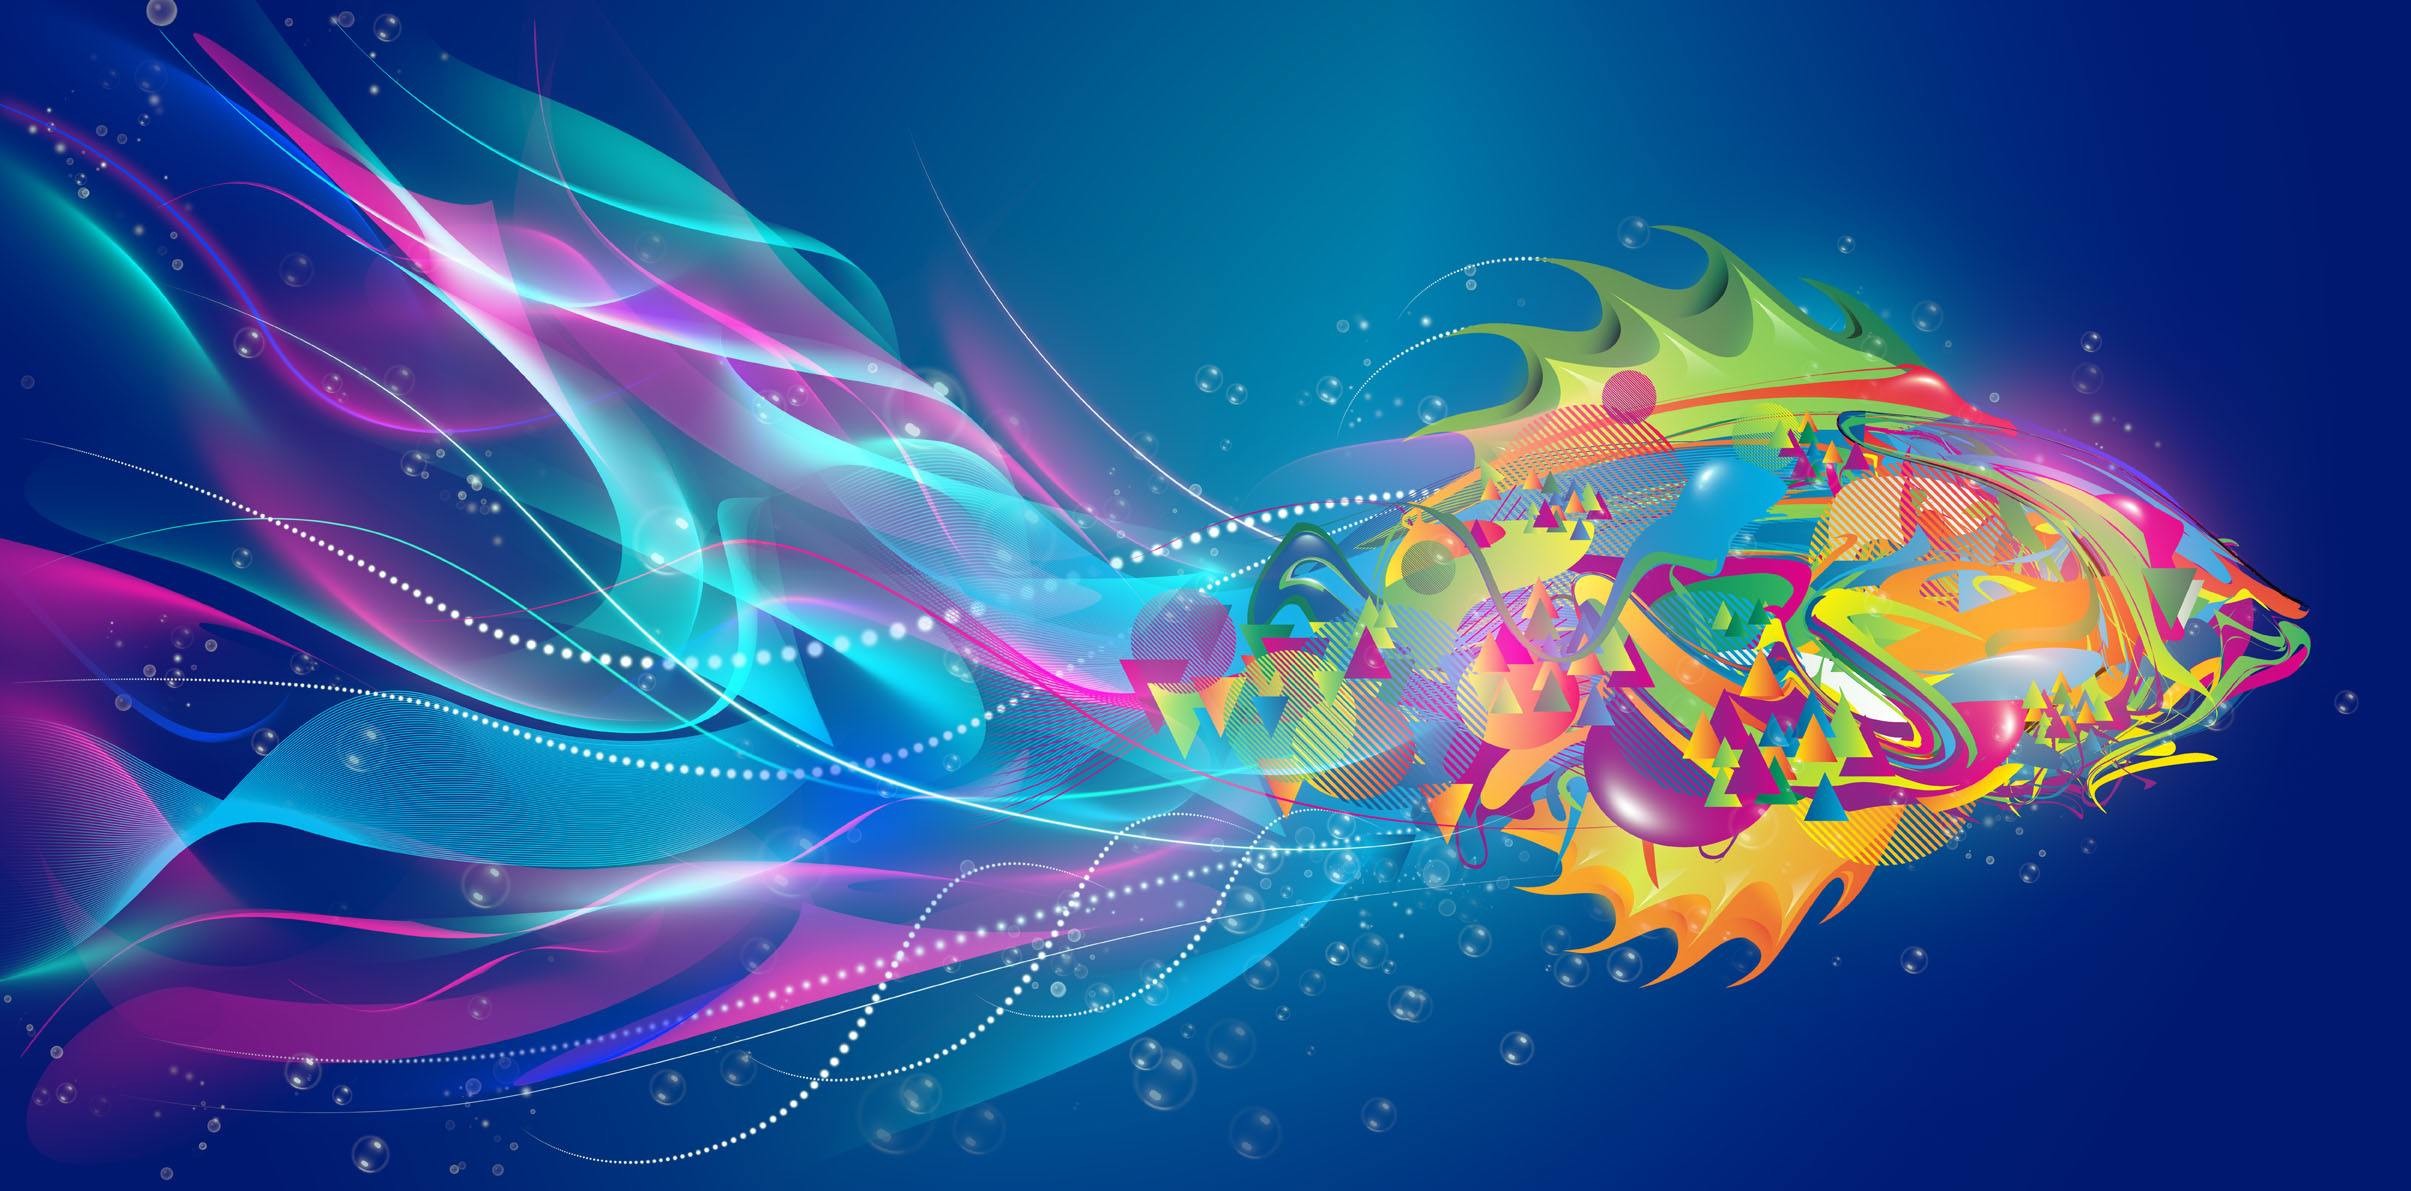 Abstract Background Images - Free Download on Freepik